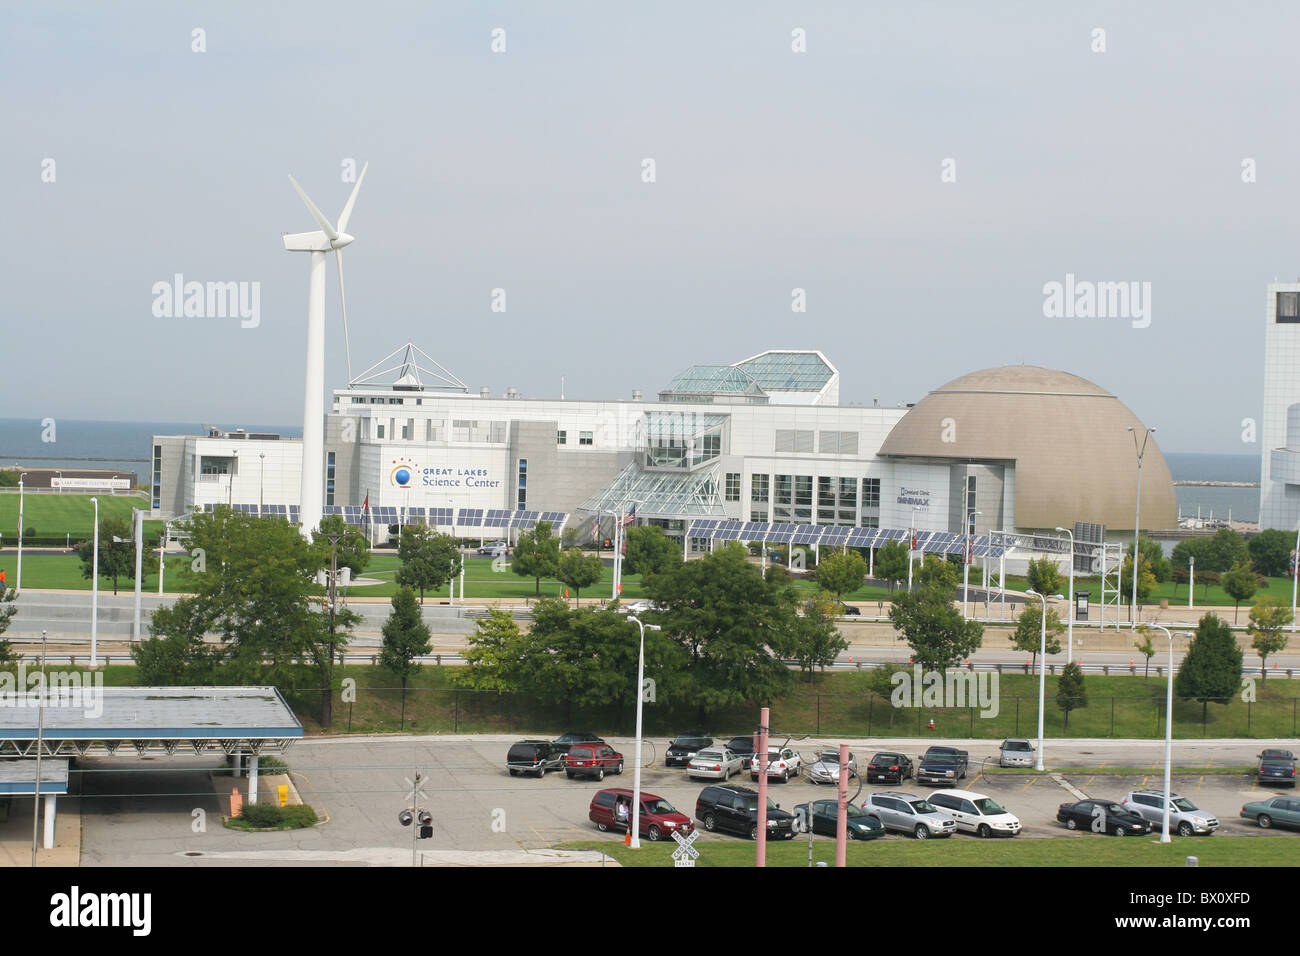 Great Lakes Science Center. Cleveland, Ohio, USA. Windmühle sichtbar. Stockfoto